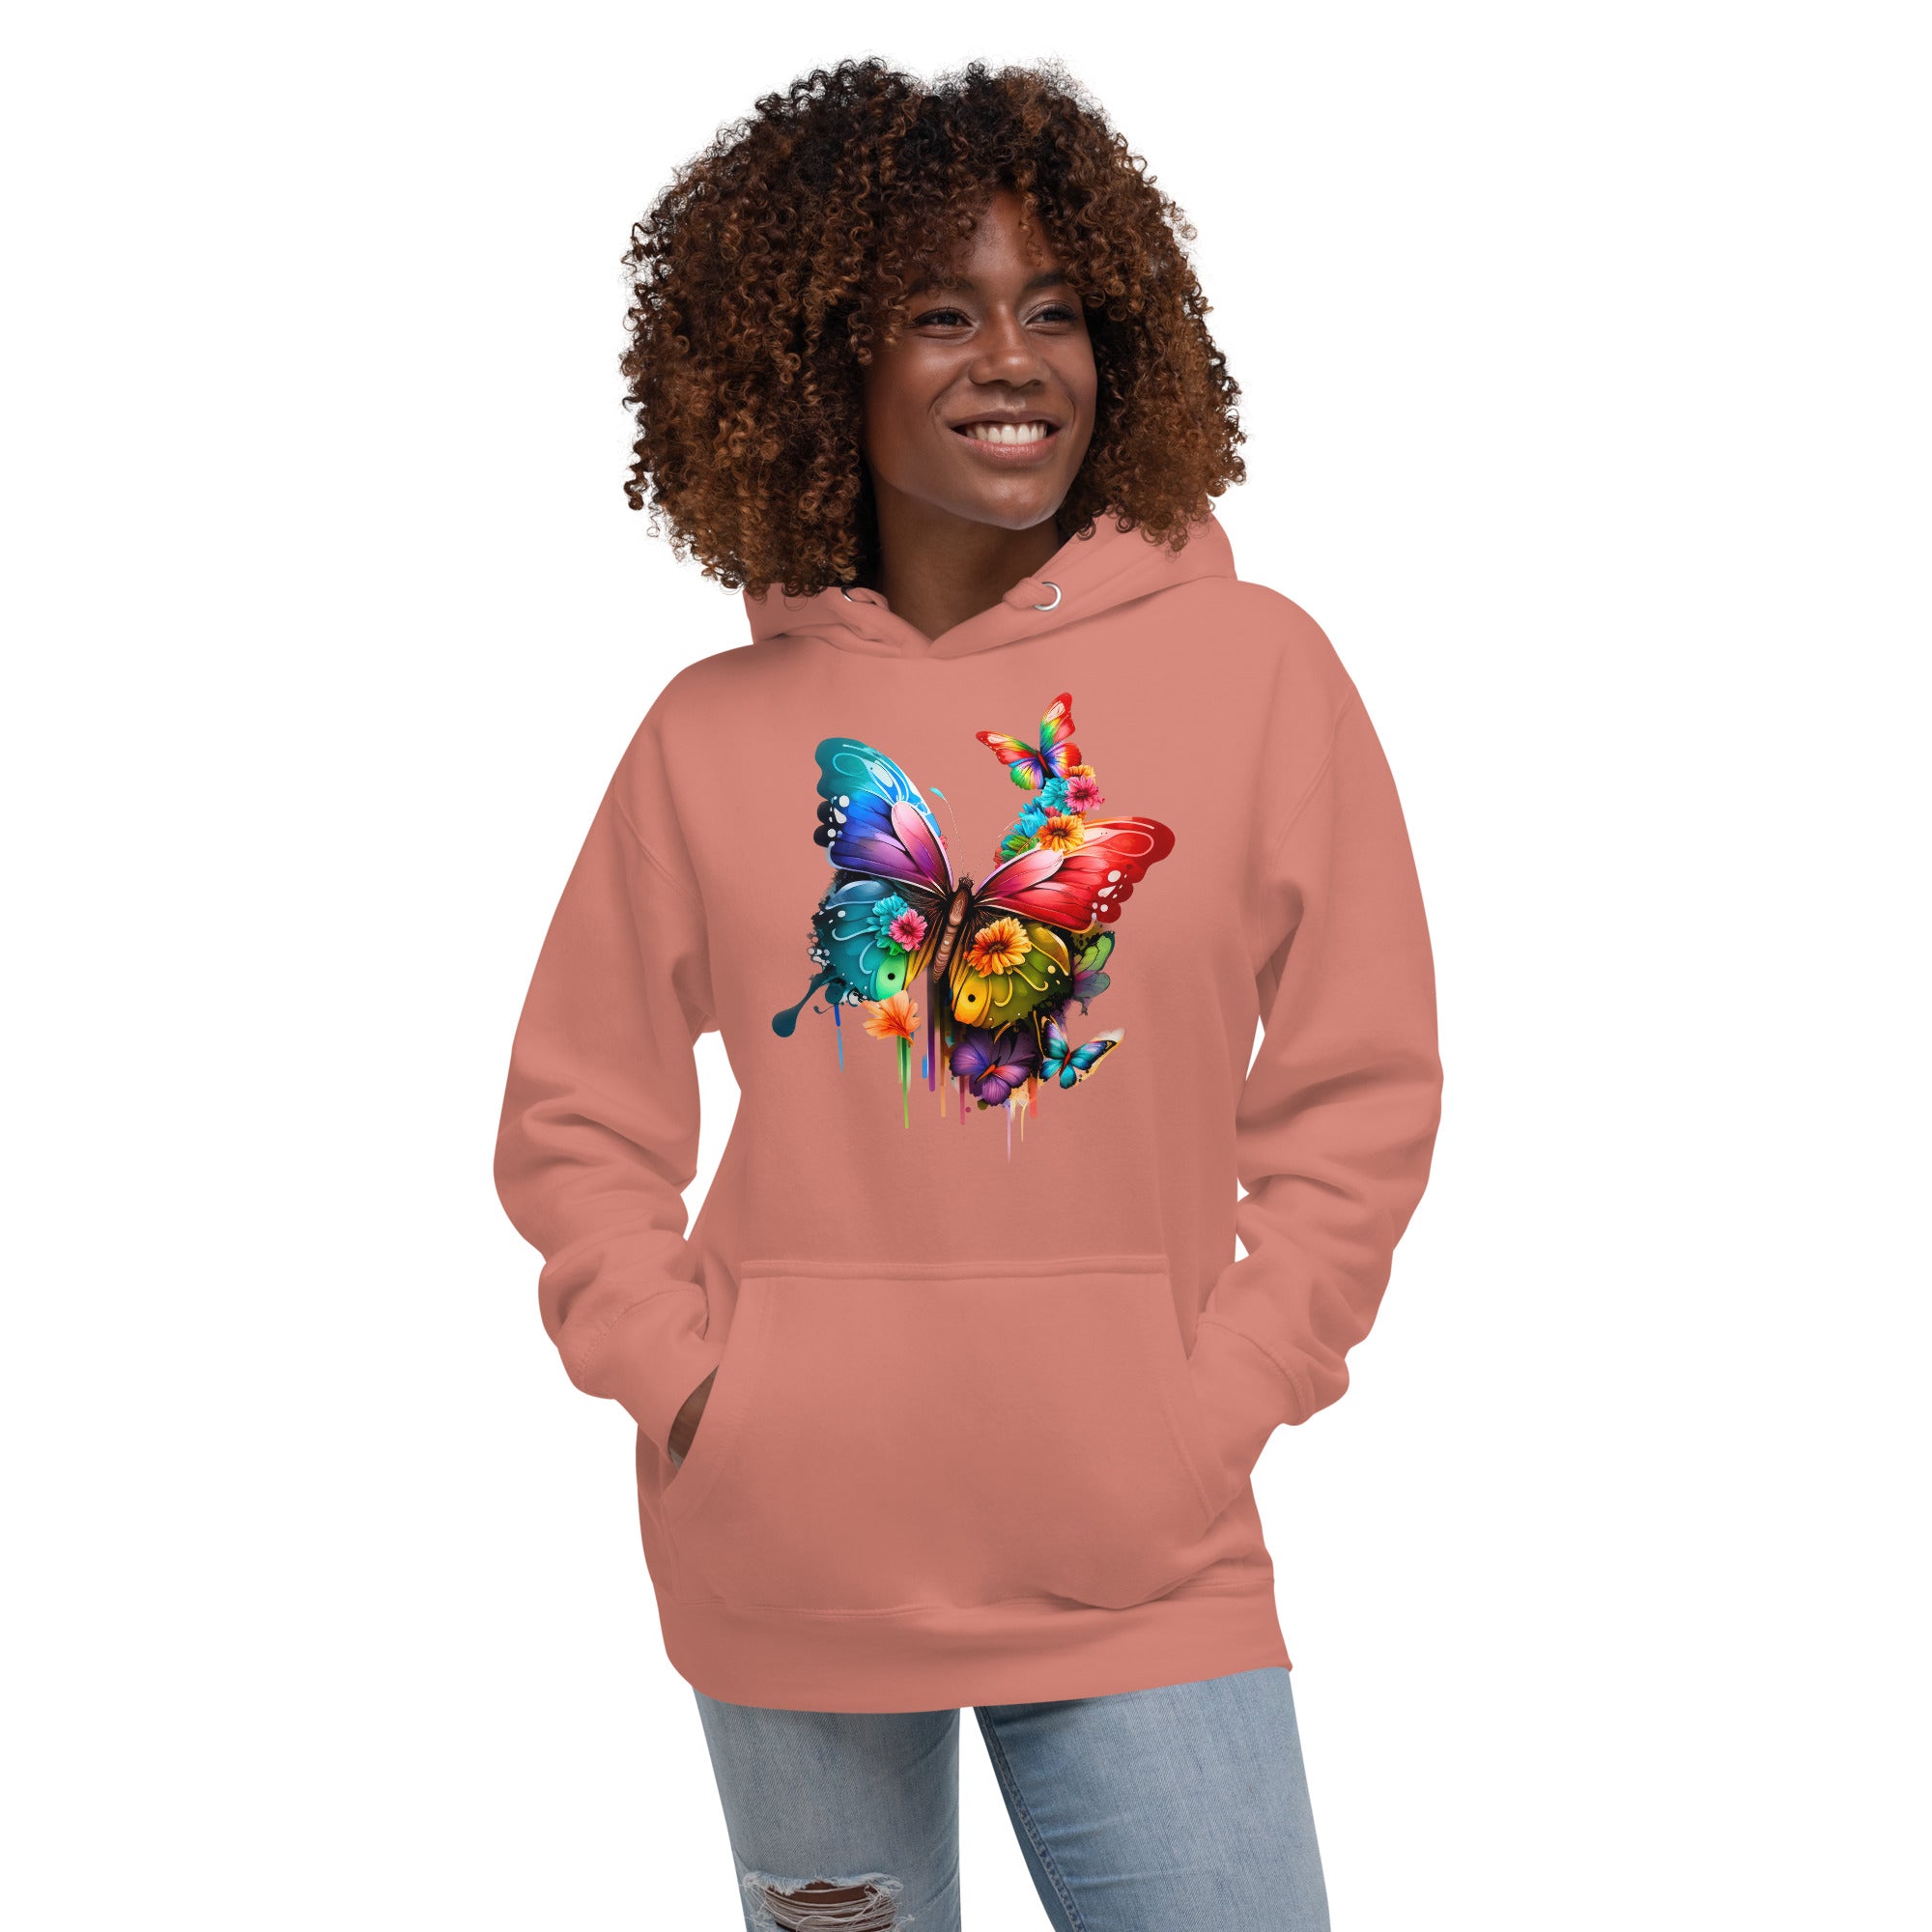 Women's Graphic Designs Hoodie (Butterfly)